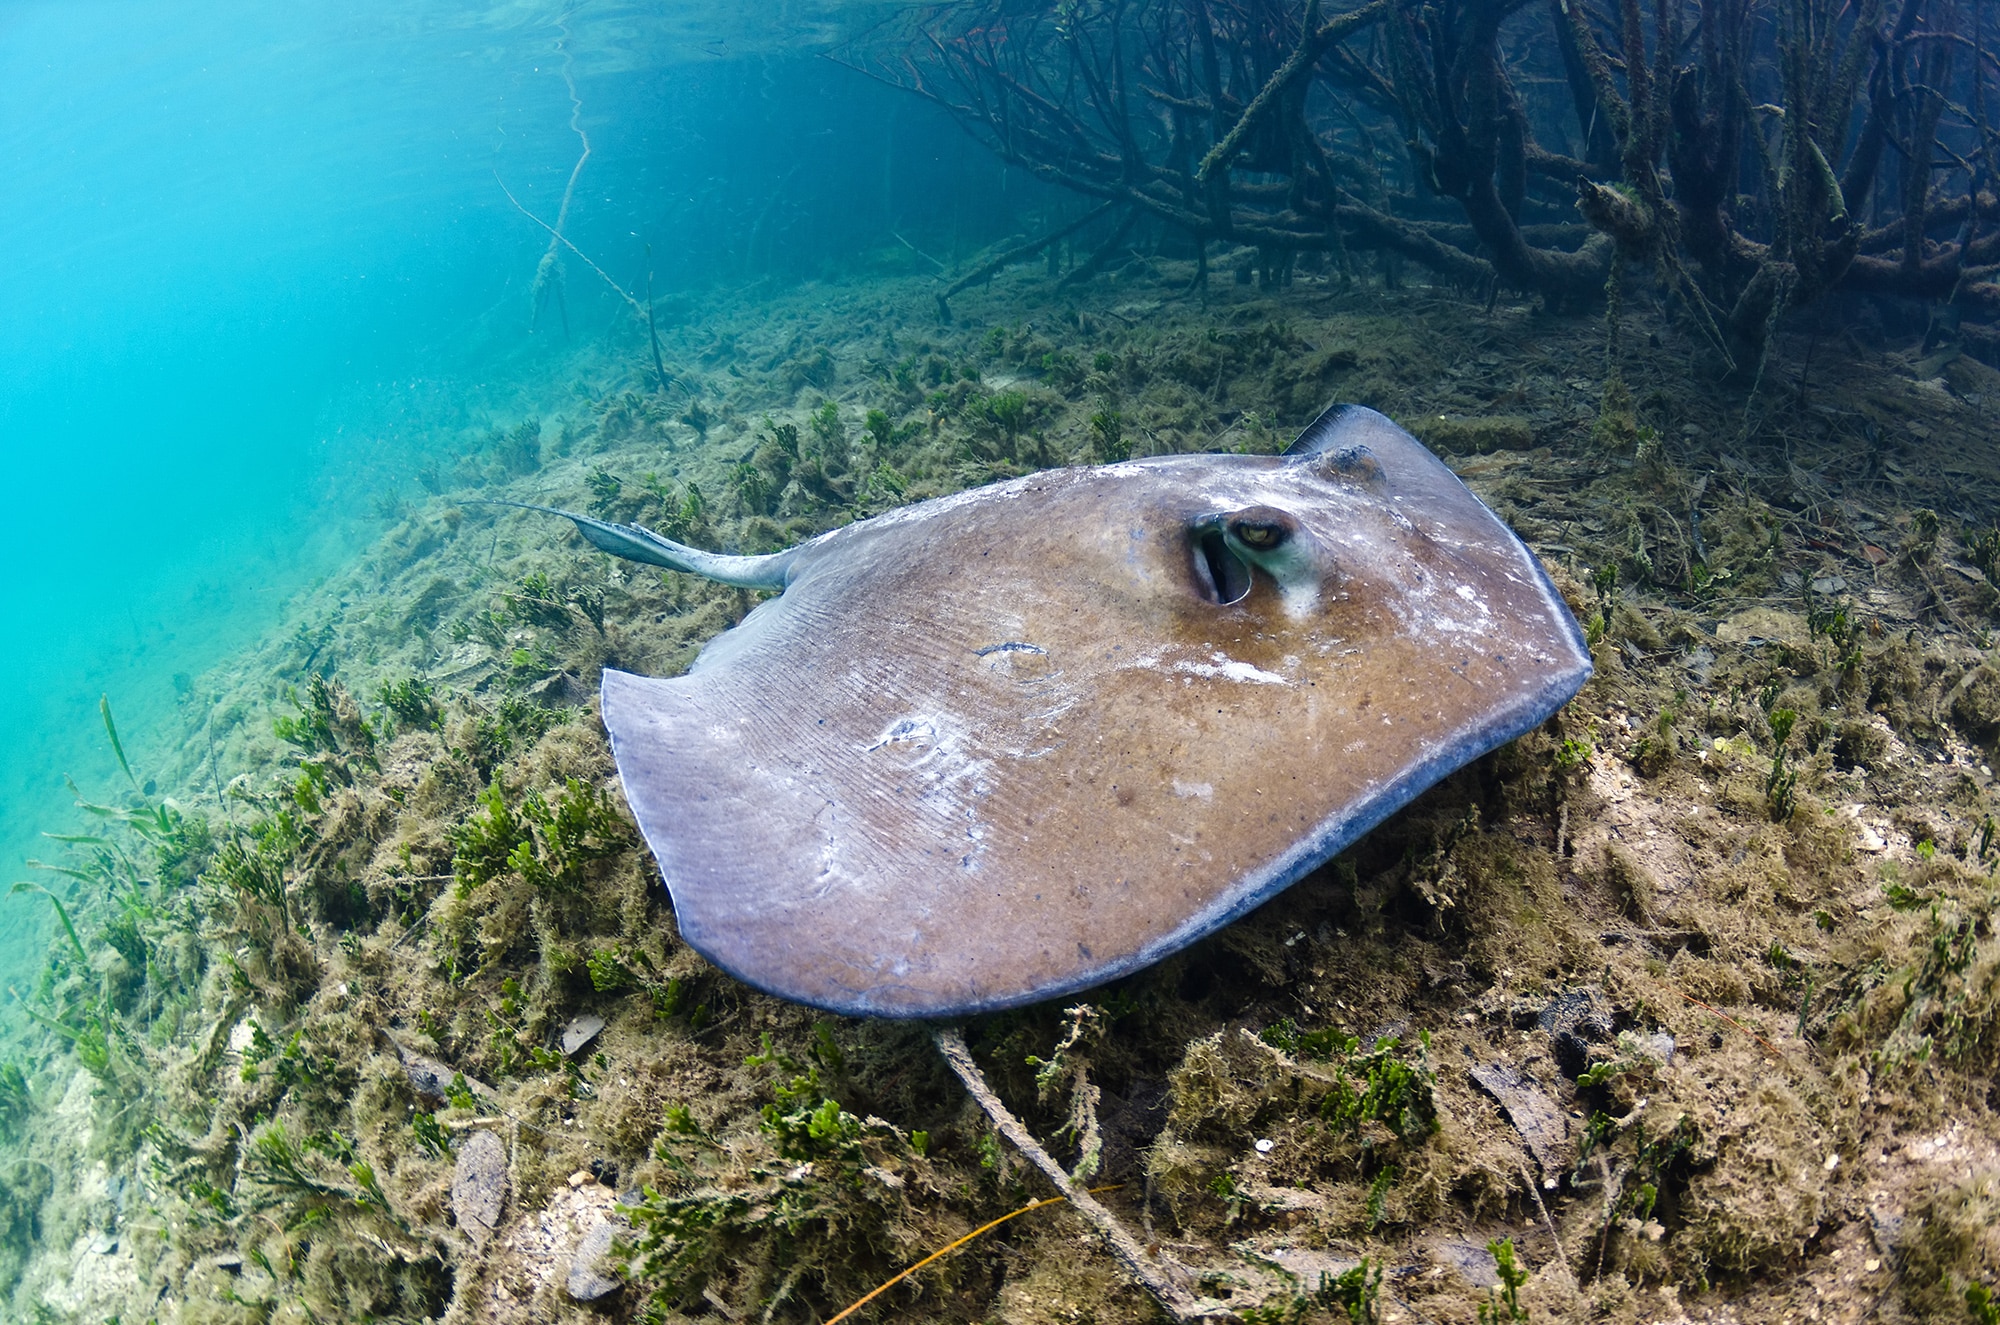 Things to do in the Bahamas: snorkeling with stingrays